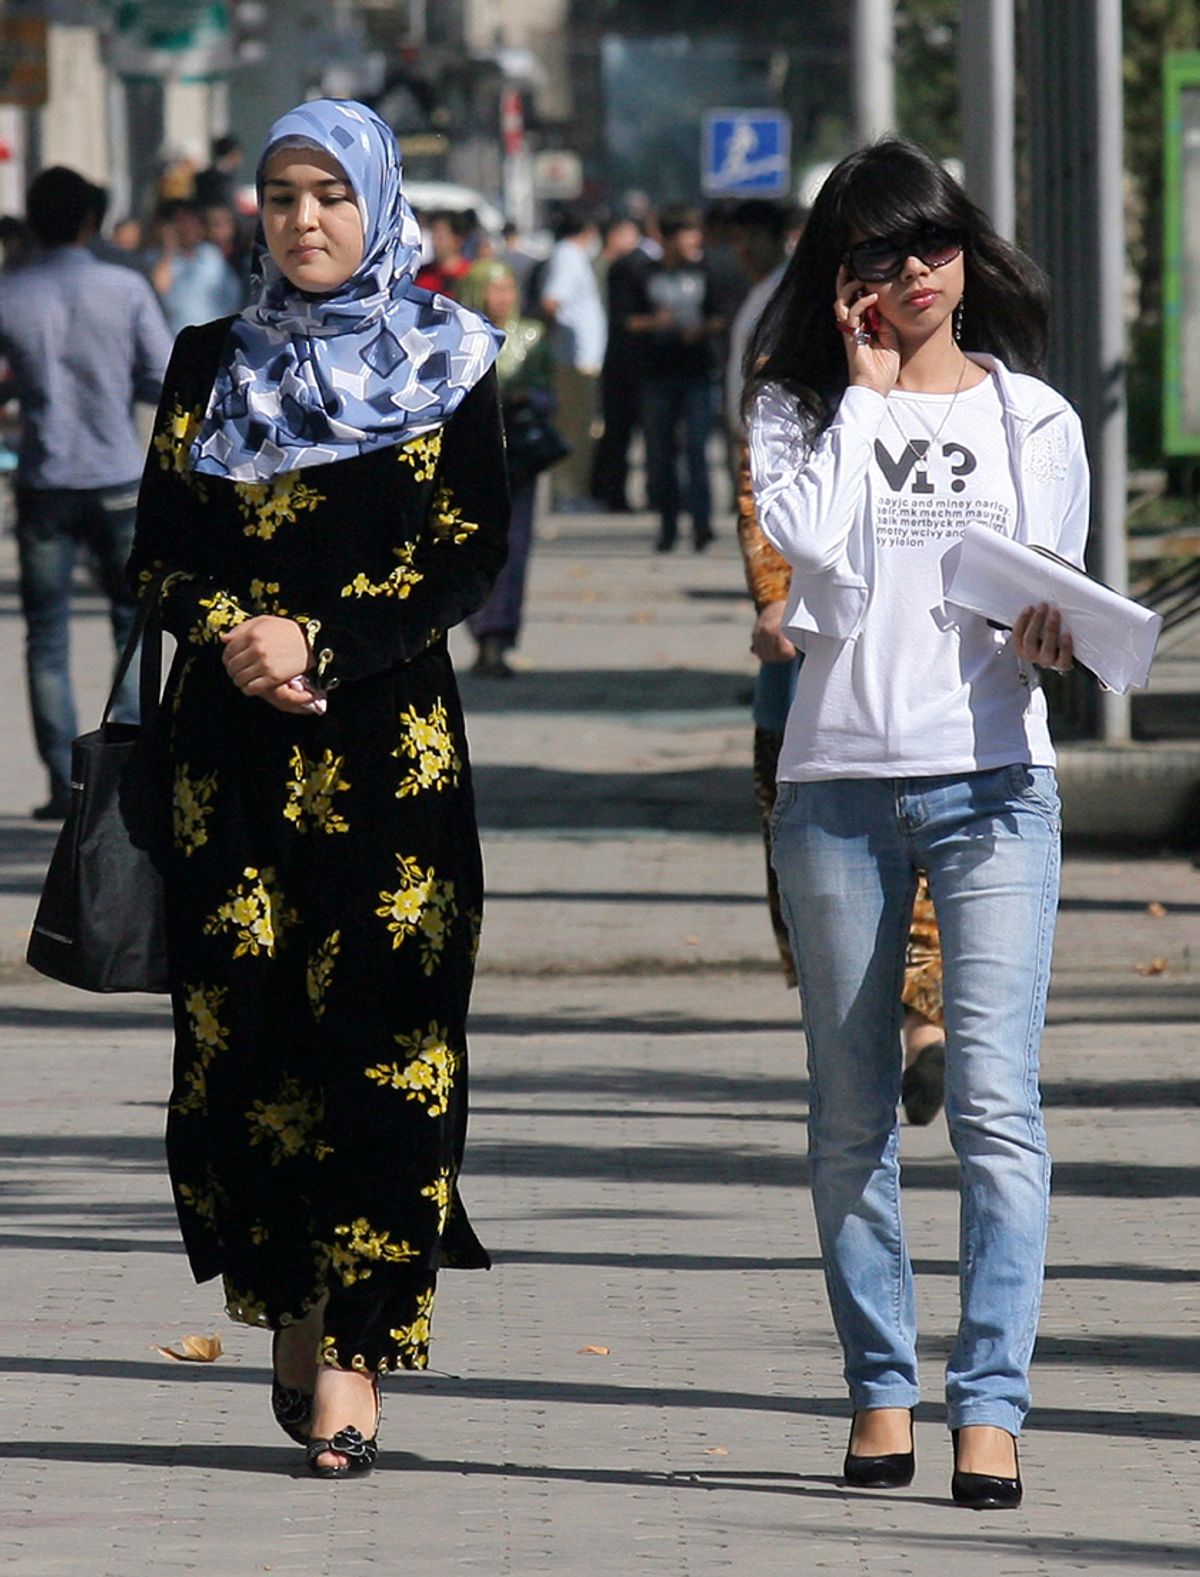 A woman, wearing a headscarf according to the Islamic dress code, walks next to a women dressed in a western style on a street of Dushanbe September 18, 2010. Chronic poverty and a Soviet-style crackdown on religion is fuelling the growth of radical Islam in parts of Central Asia, a secular but mainly Muslim region wedged between Russia, Iran, Afghanistan and China. Picture taken September 18, 2010. To match feature TAJIKISTAN-SECURITY/  REUTERS/Nozim Kalandarov  (TAJIKISTAN - Tags: RELIGION POLITICS) (Â© Nozim Kalandrov / Reuters)